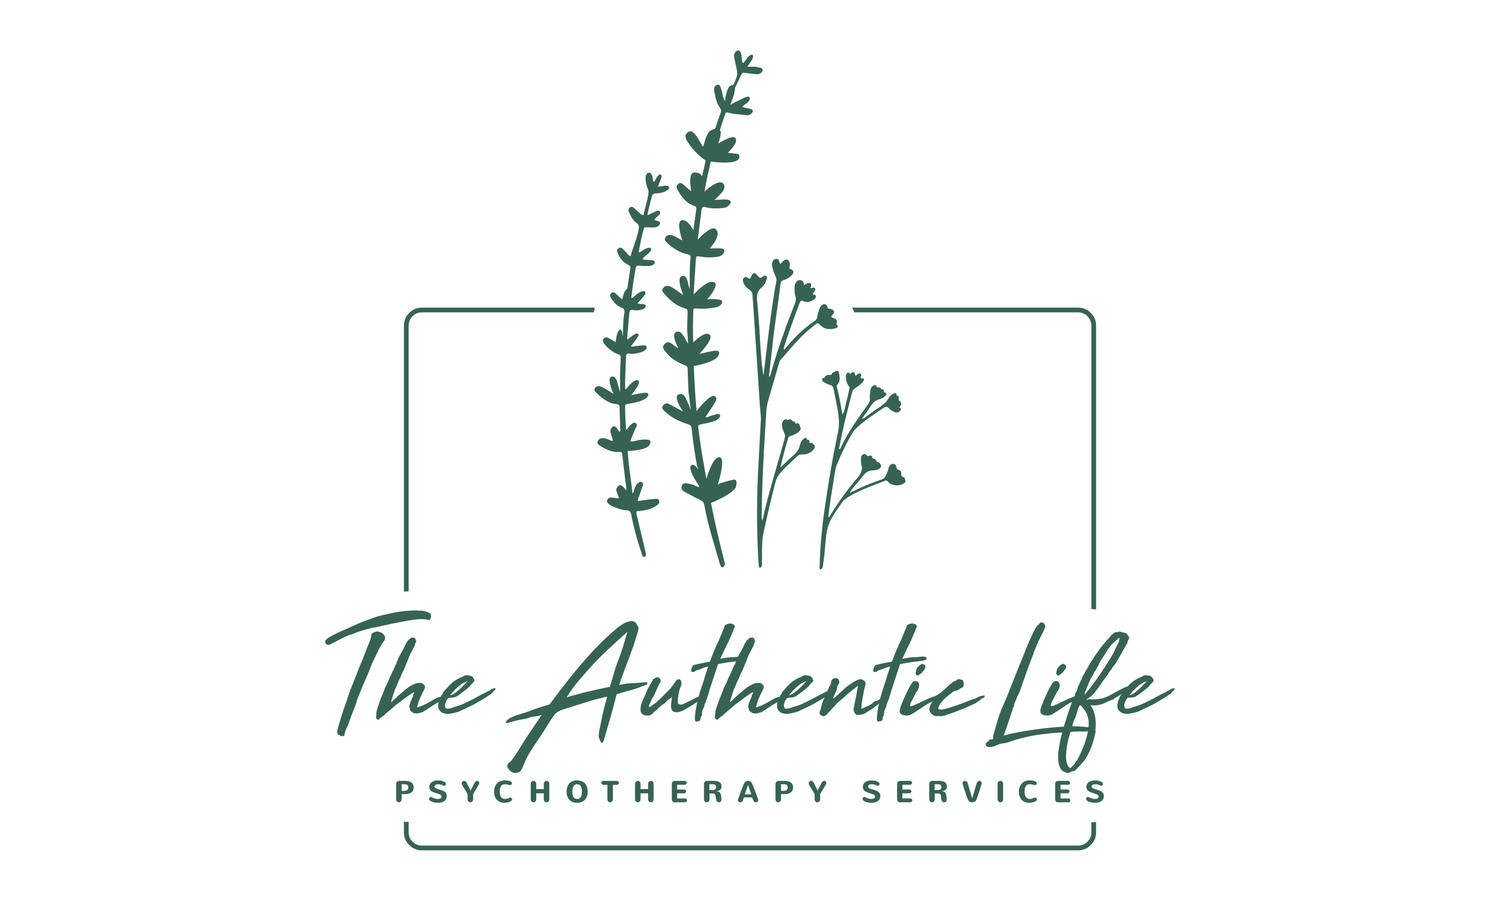 The Authentic Life - Psychotherapy Services